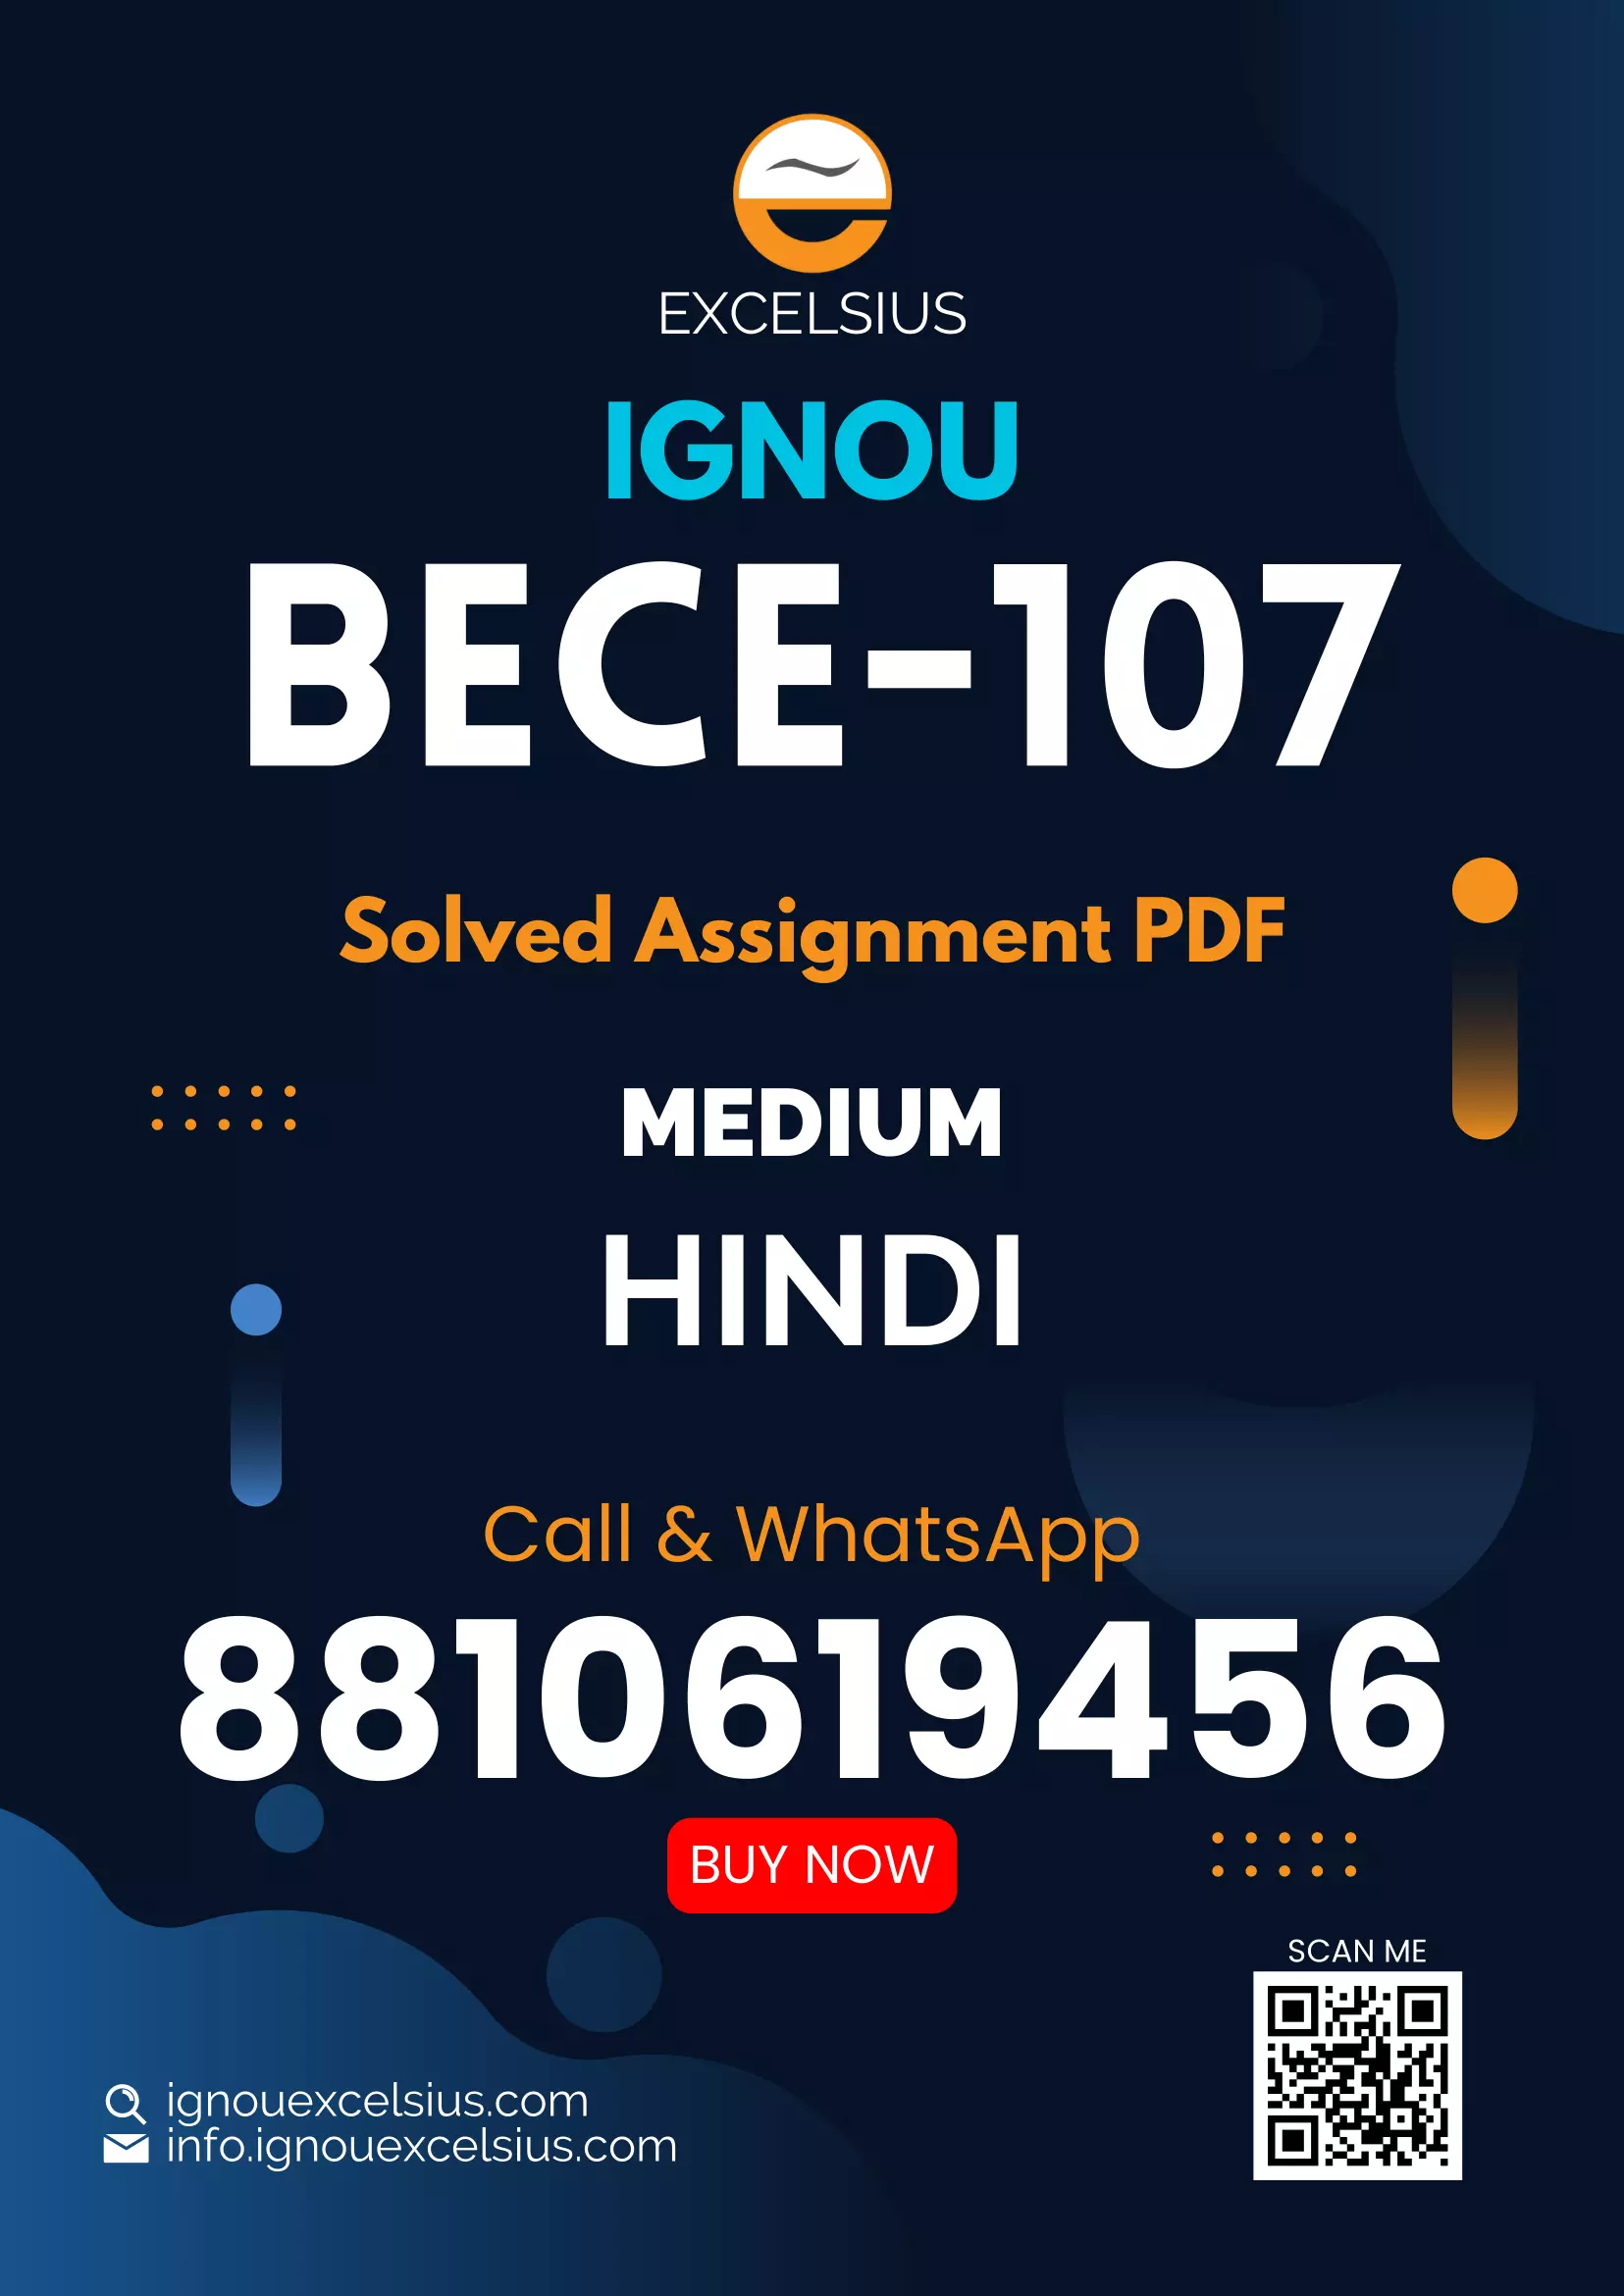 IGNOU BECE-107 - Industrial Development in India, Latest Solved Assignment-July 2022 – January 2023